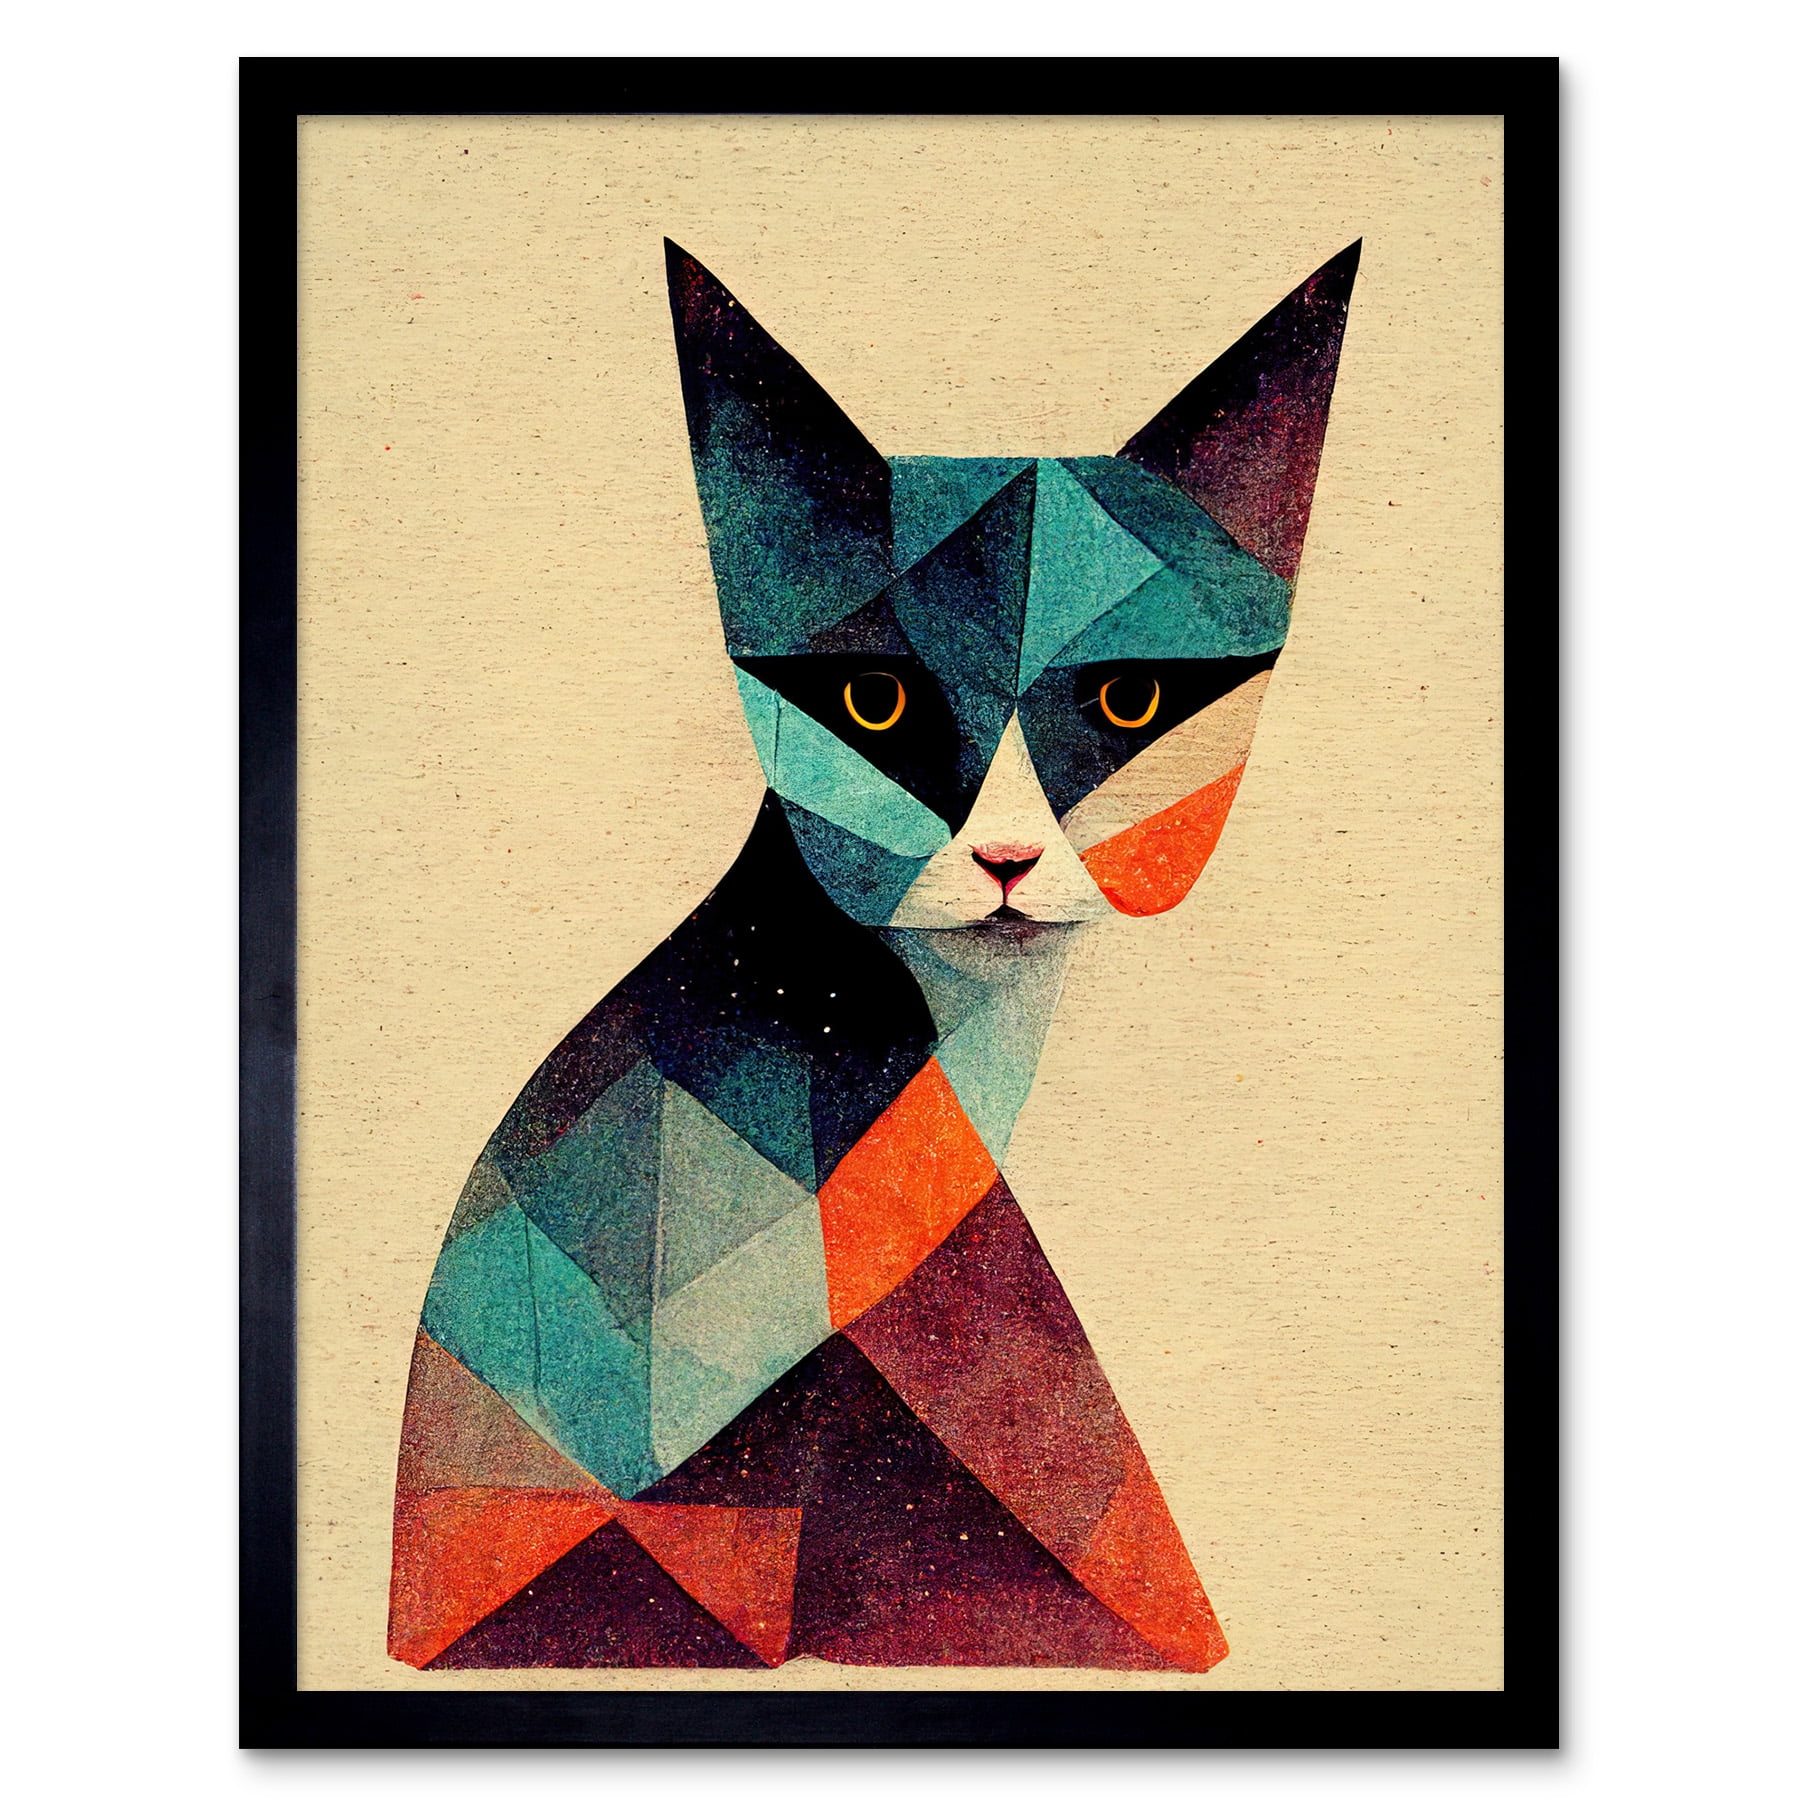 EzPosterPrints - Cat Posters - Cubism Colorful Cute Cats - Poster Printing  - Wall Art Print for Home Office Decor - Colorful Cat 7-16X16 inches